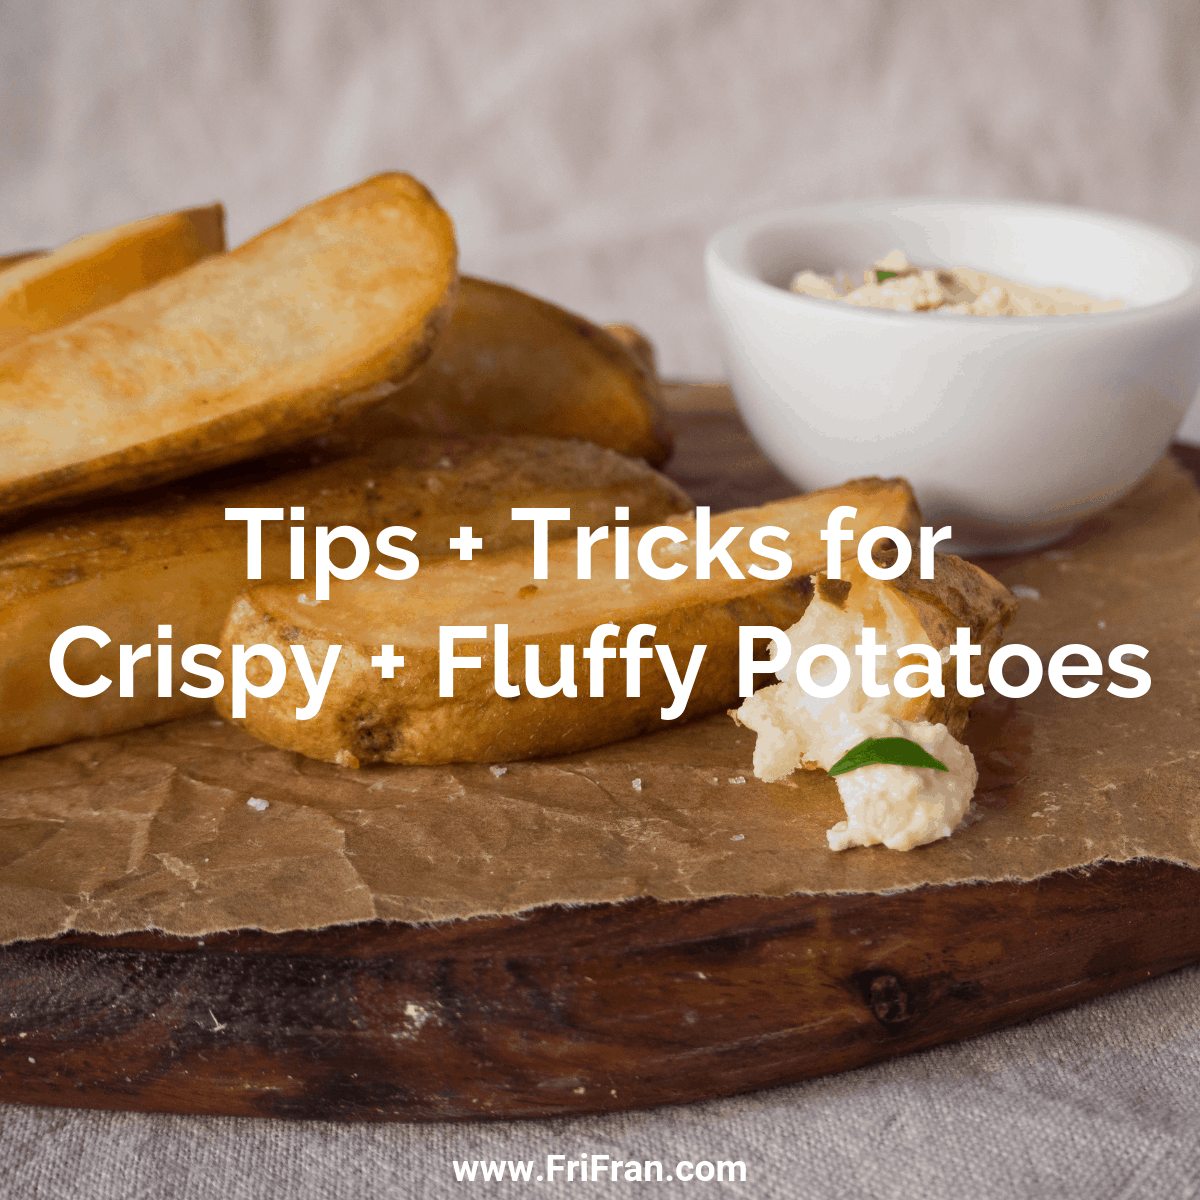 Tips and Tricks for Crispy And Fluffy Potatoes. Gluten-free, vegan. From FriFran